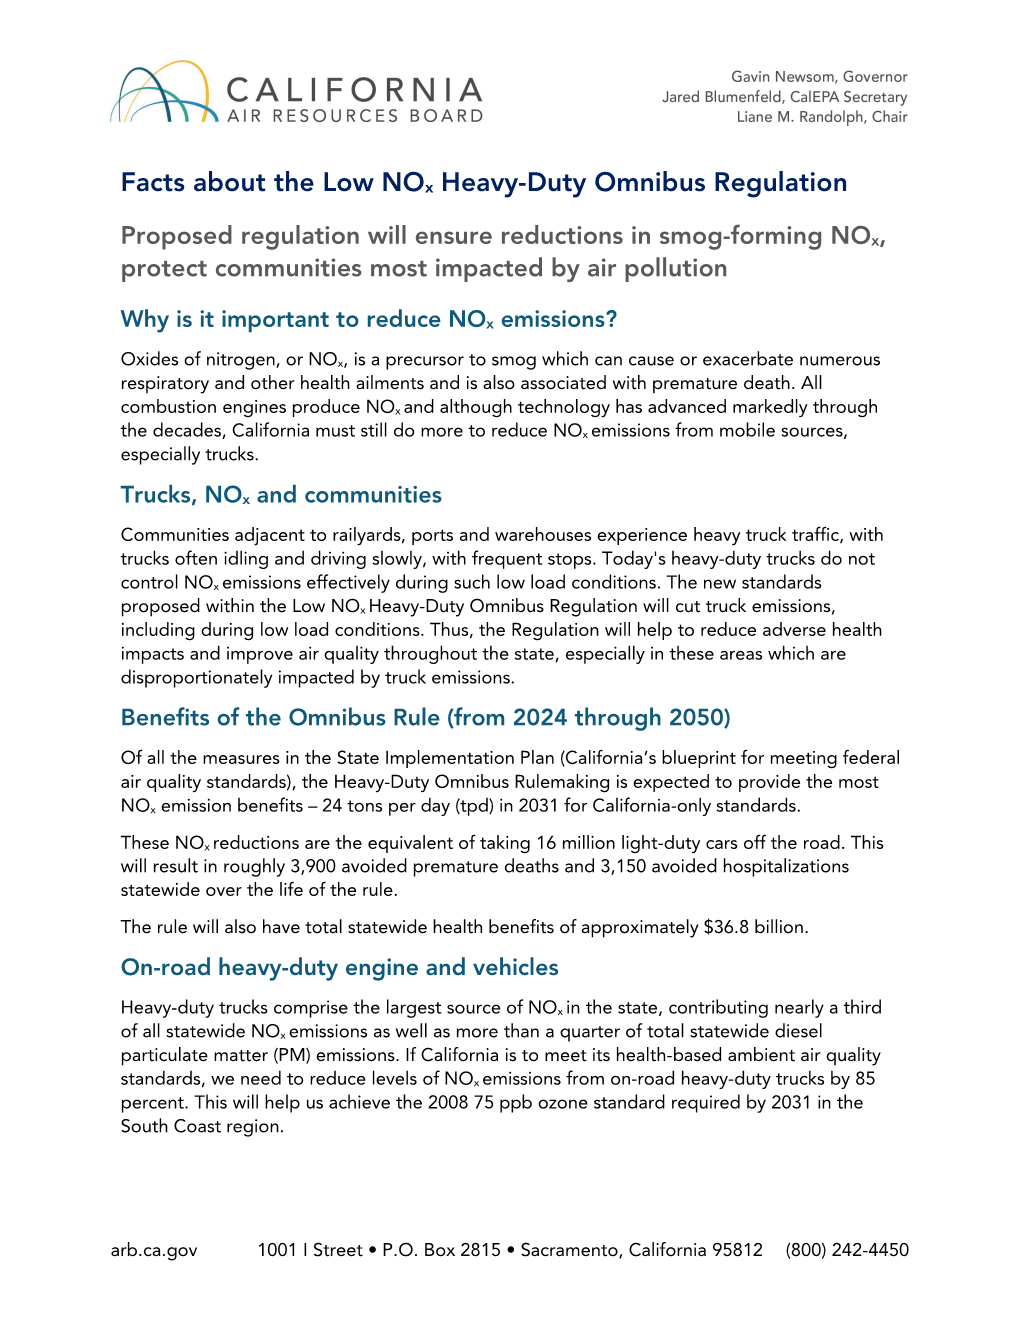 Facts About the Low Nox Heavy-Duty Omnibus Regulation